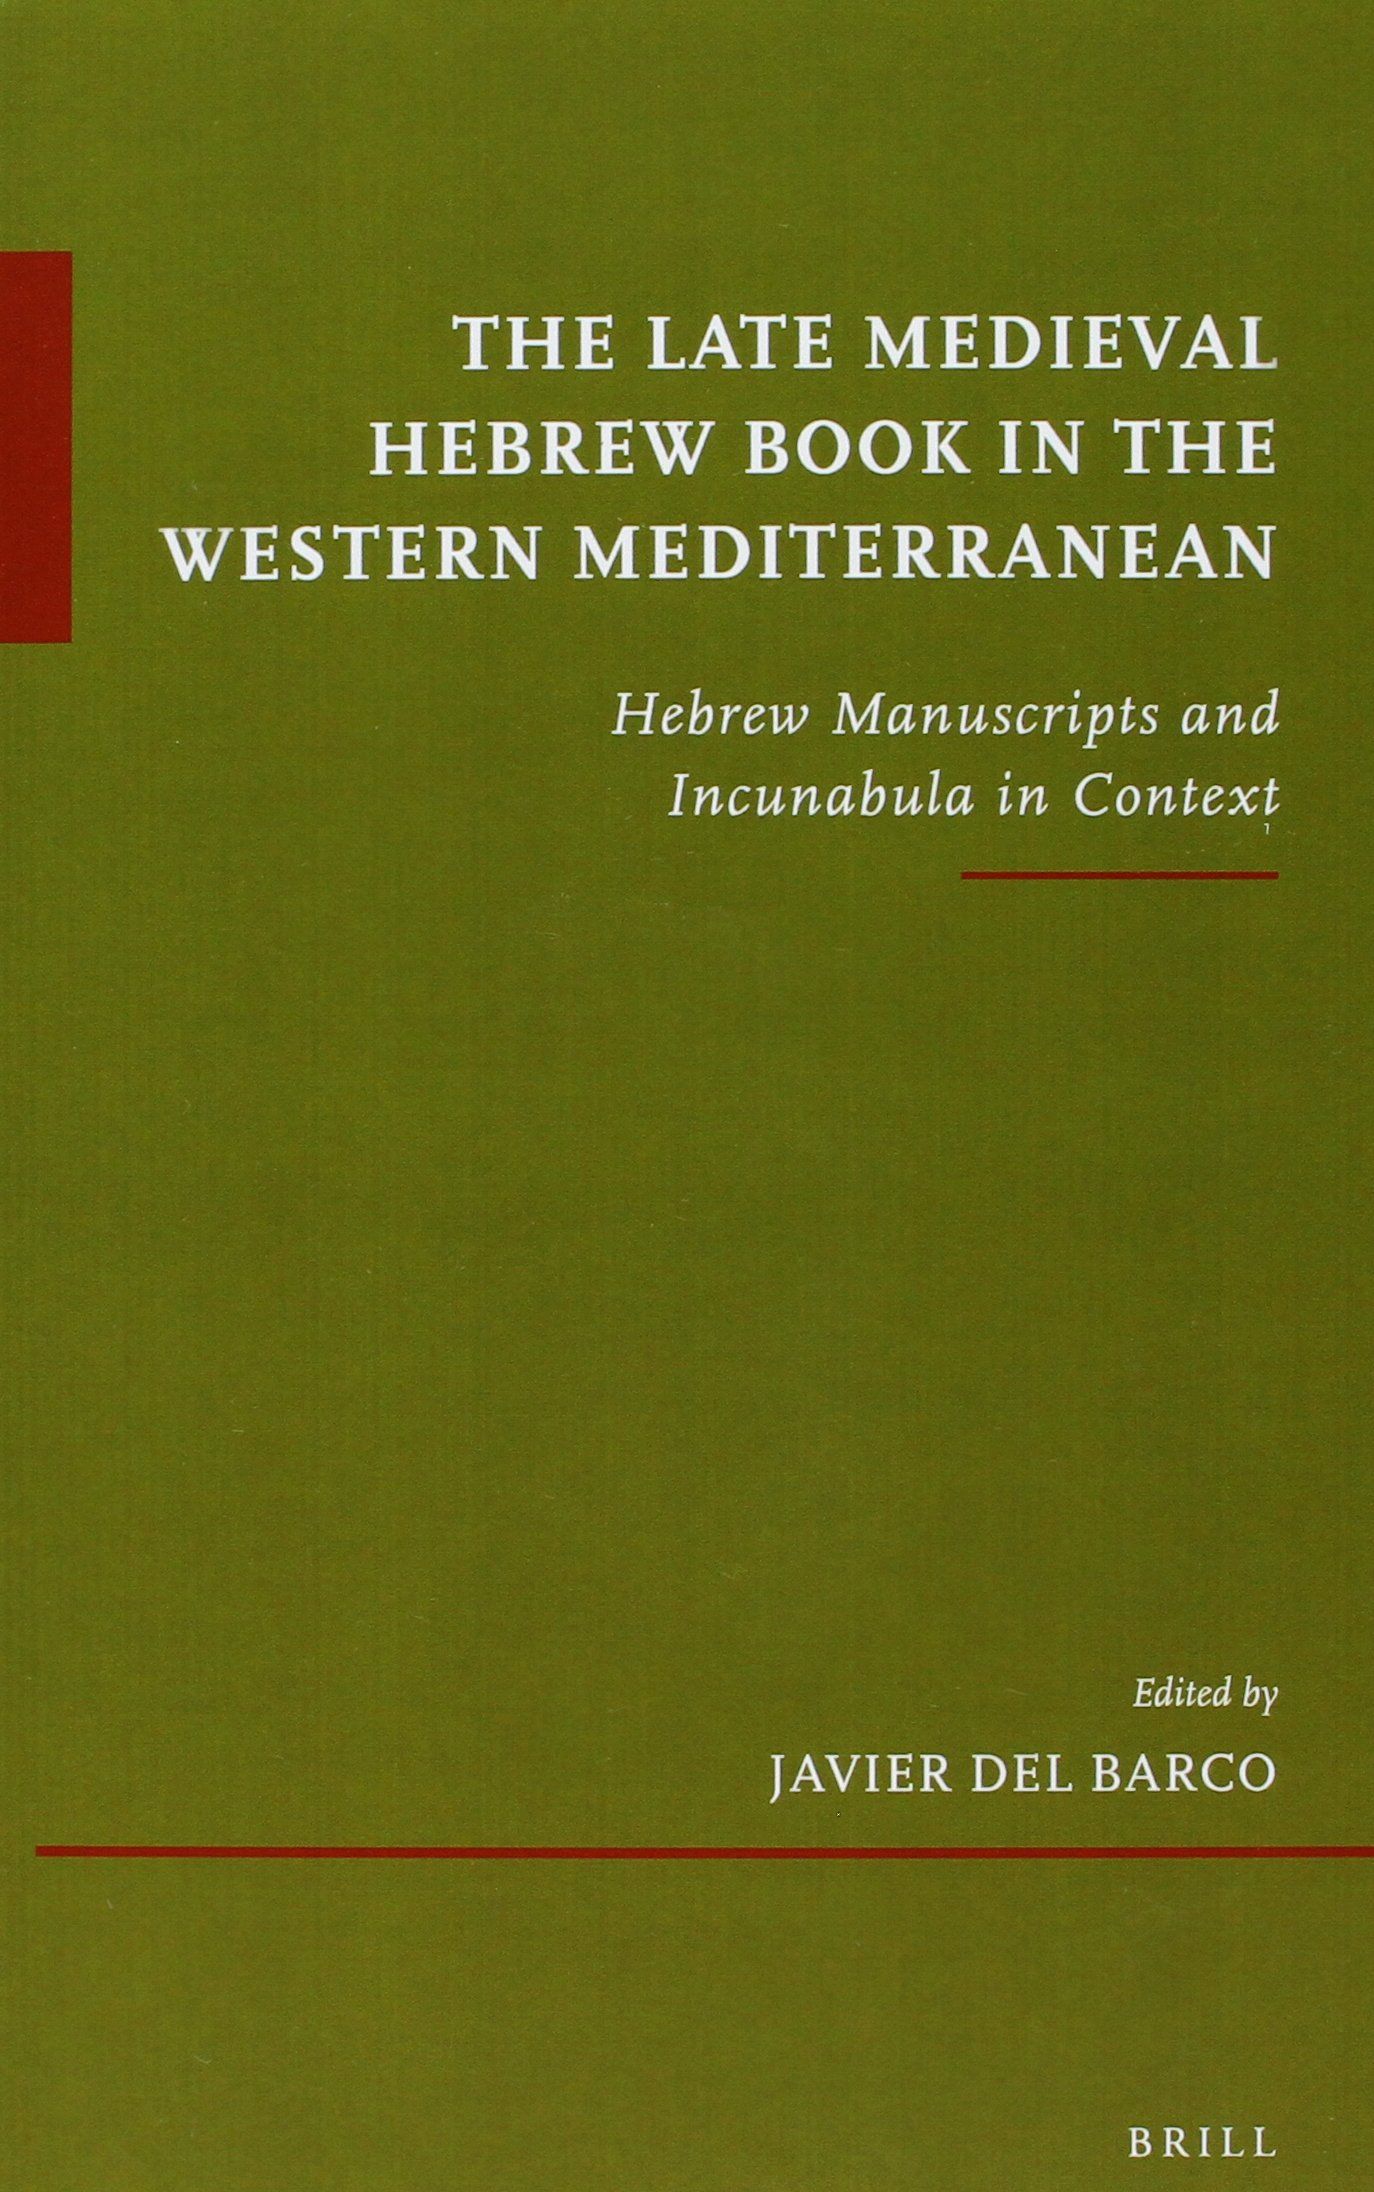 The late medieval hebrew book in the western mediterranean